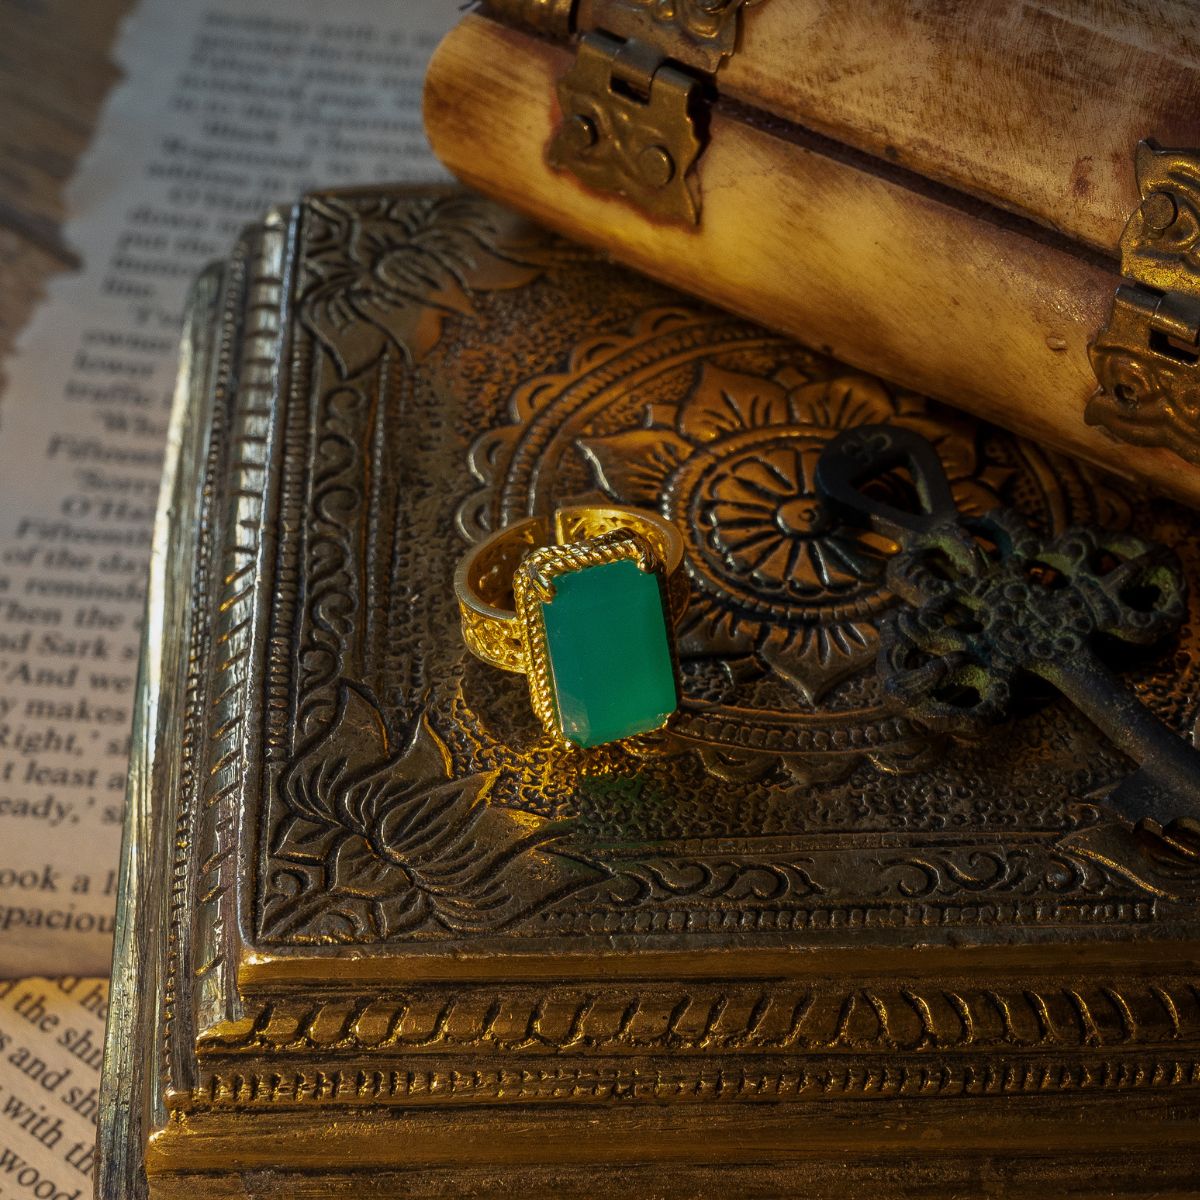 Style Never Fades Green Onyx Ring